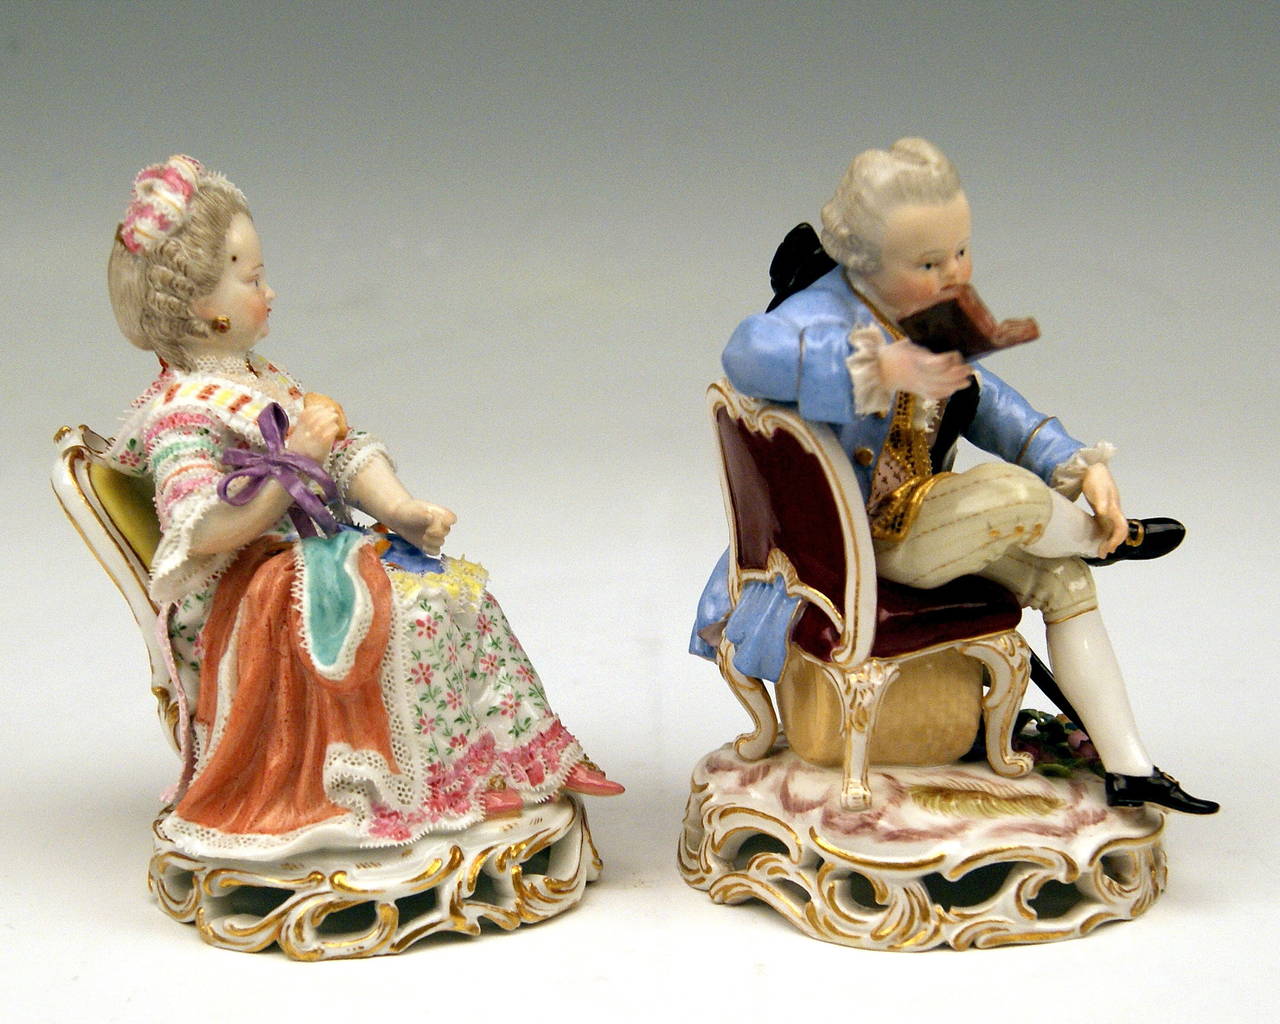 Meissen Lovely Pair of Child Figurines:
Girl Dressed as Elegant Rococo Lady, seizing a shell in right hand  &  Boy Reading a Book  
   
MANUFACTORY:  MEISSEN

DATING:   19th century / made  circa 1850 - 60

MATERIAL:  WHITE PORCELAIN, GLOSSY